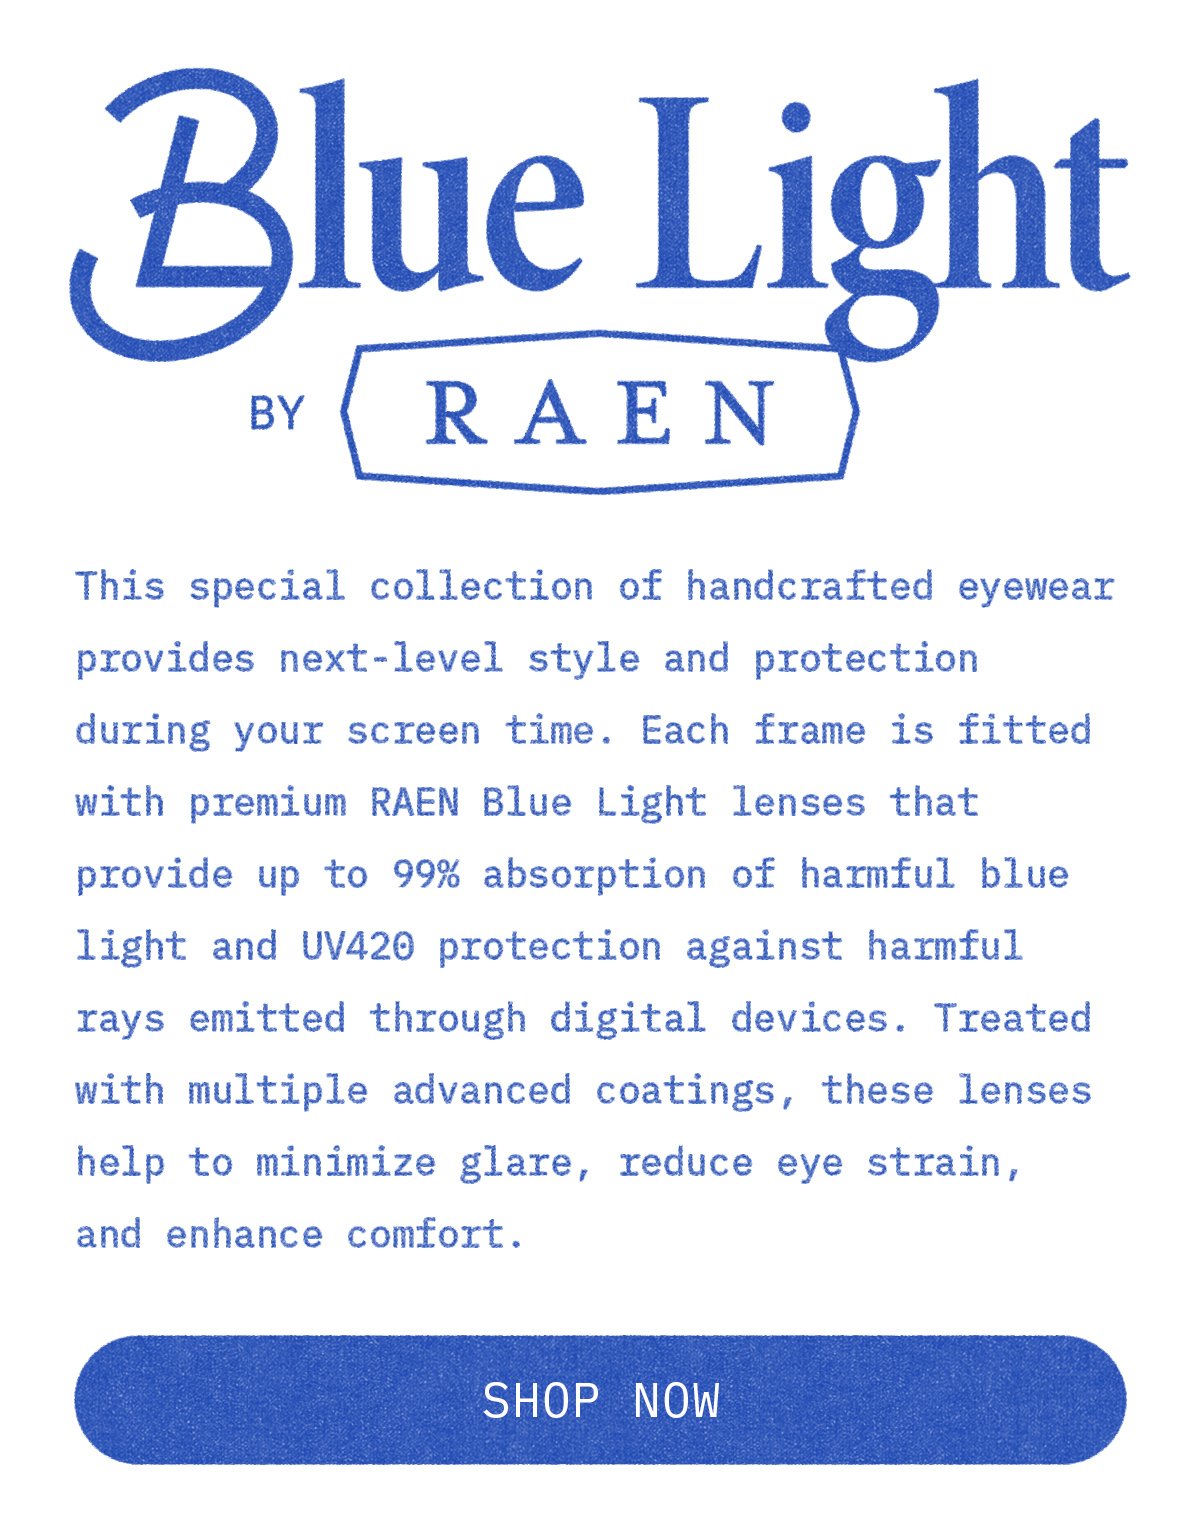 NEW Blue Light Collection